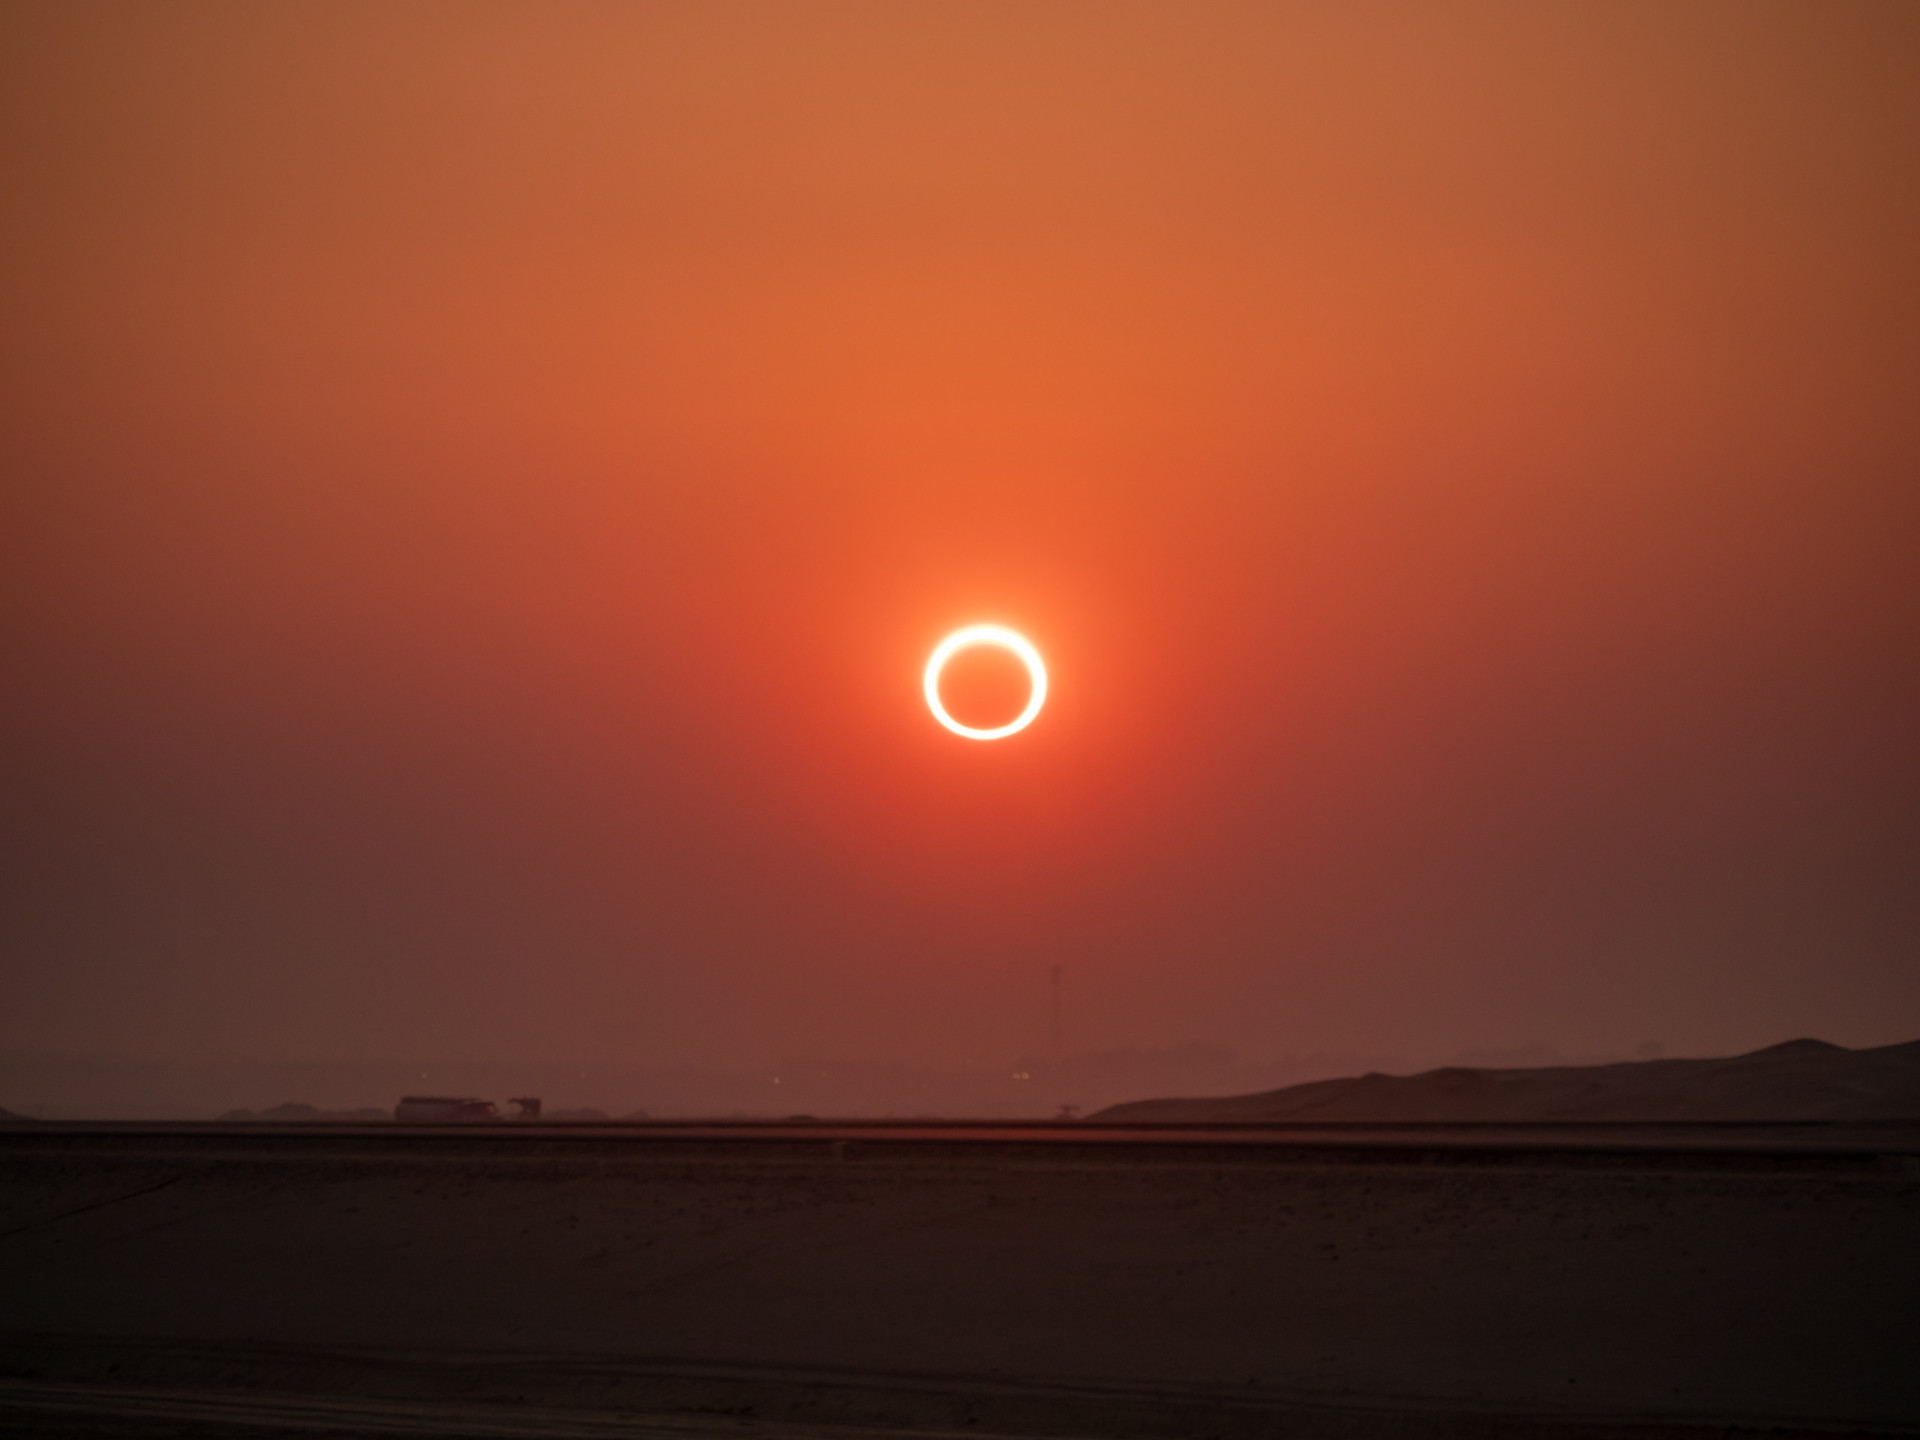 <p>The eclipse is only safe to witness with the naked eye during totality, or the period of total darkness when the Moon completely covers the Sun.</p><p><a href="https://www.msn.com/en-ca/community/channel/vid-7xx8mnucu55yw63we9va2gwr7uihbxwc68fxqp25x6tg4ftibpra?cvid=94631541bc0f4f89bfd59158d696ad7e">Follow us and access great exclusive content every day</a></p>